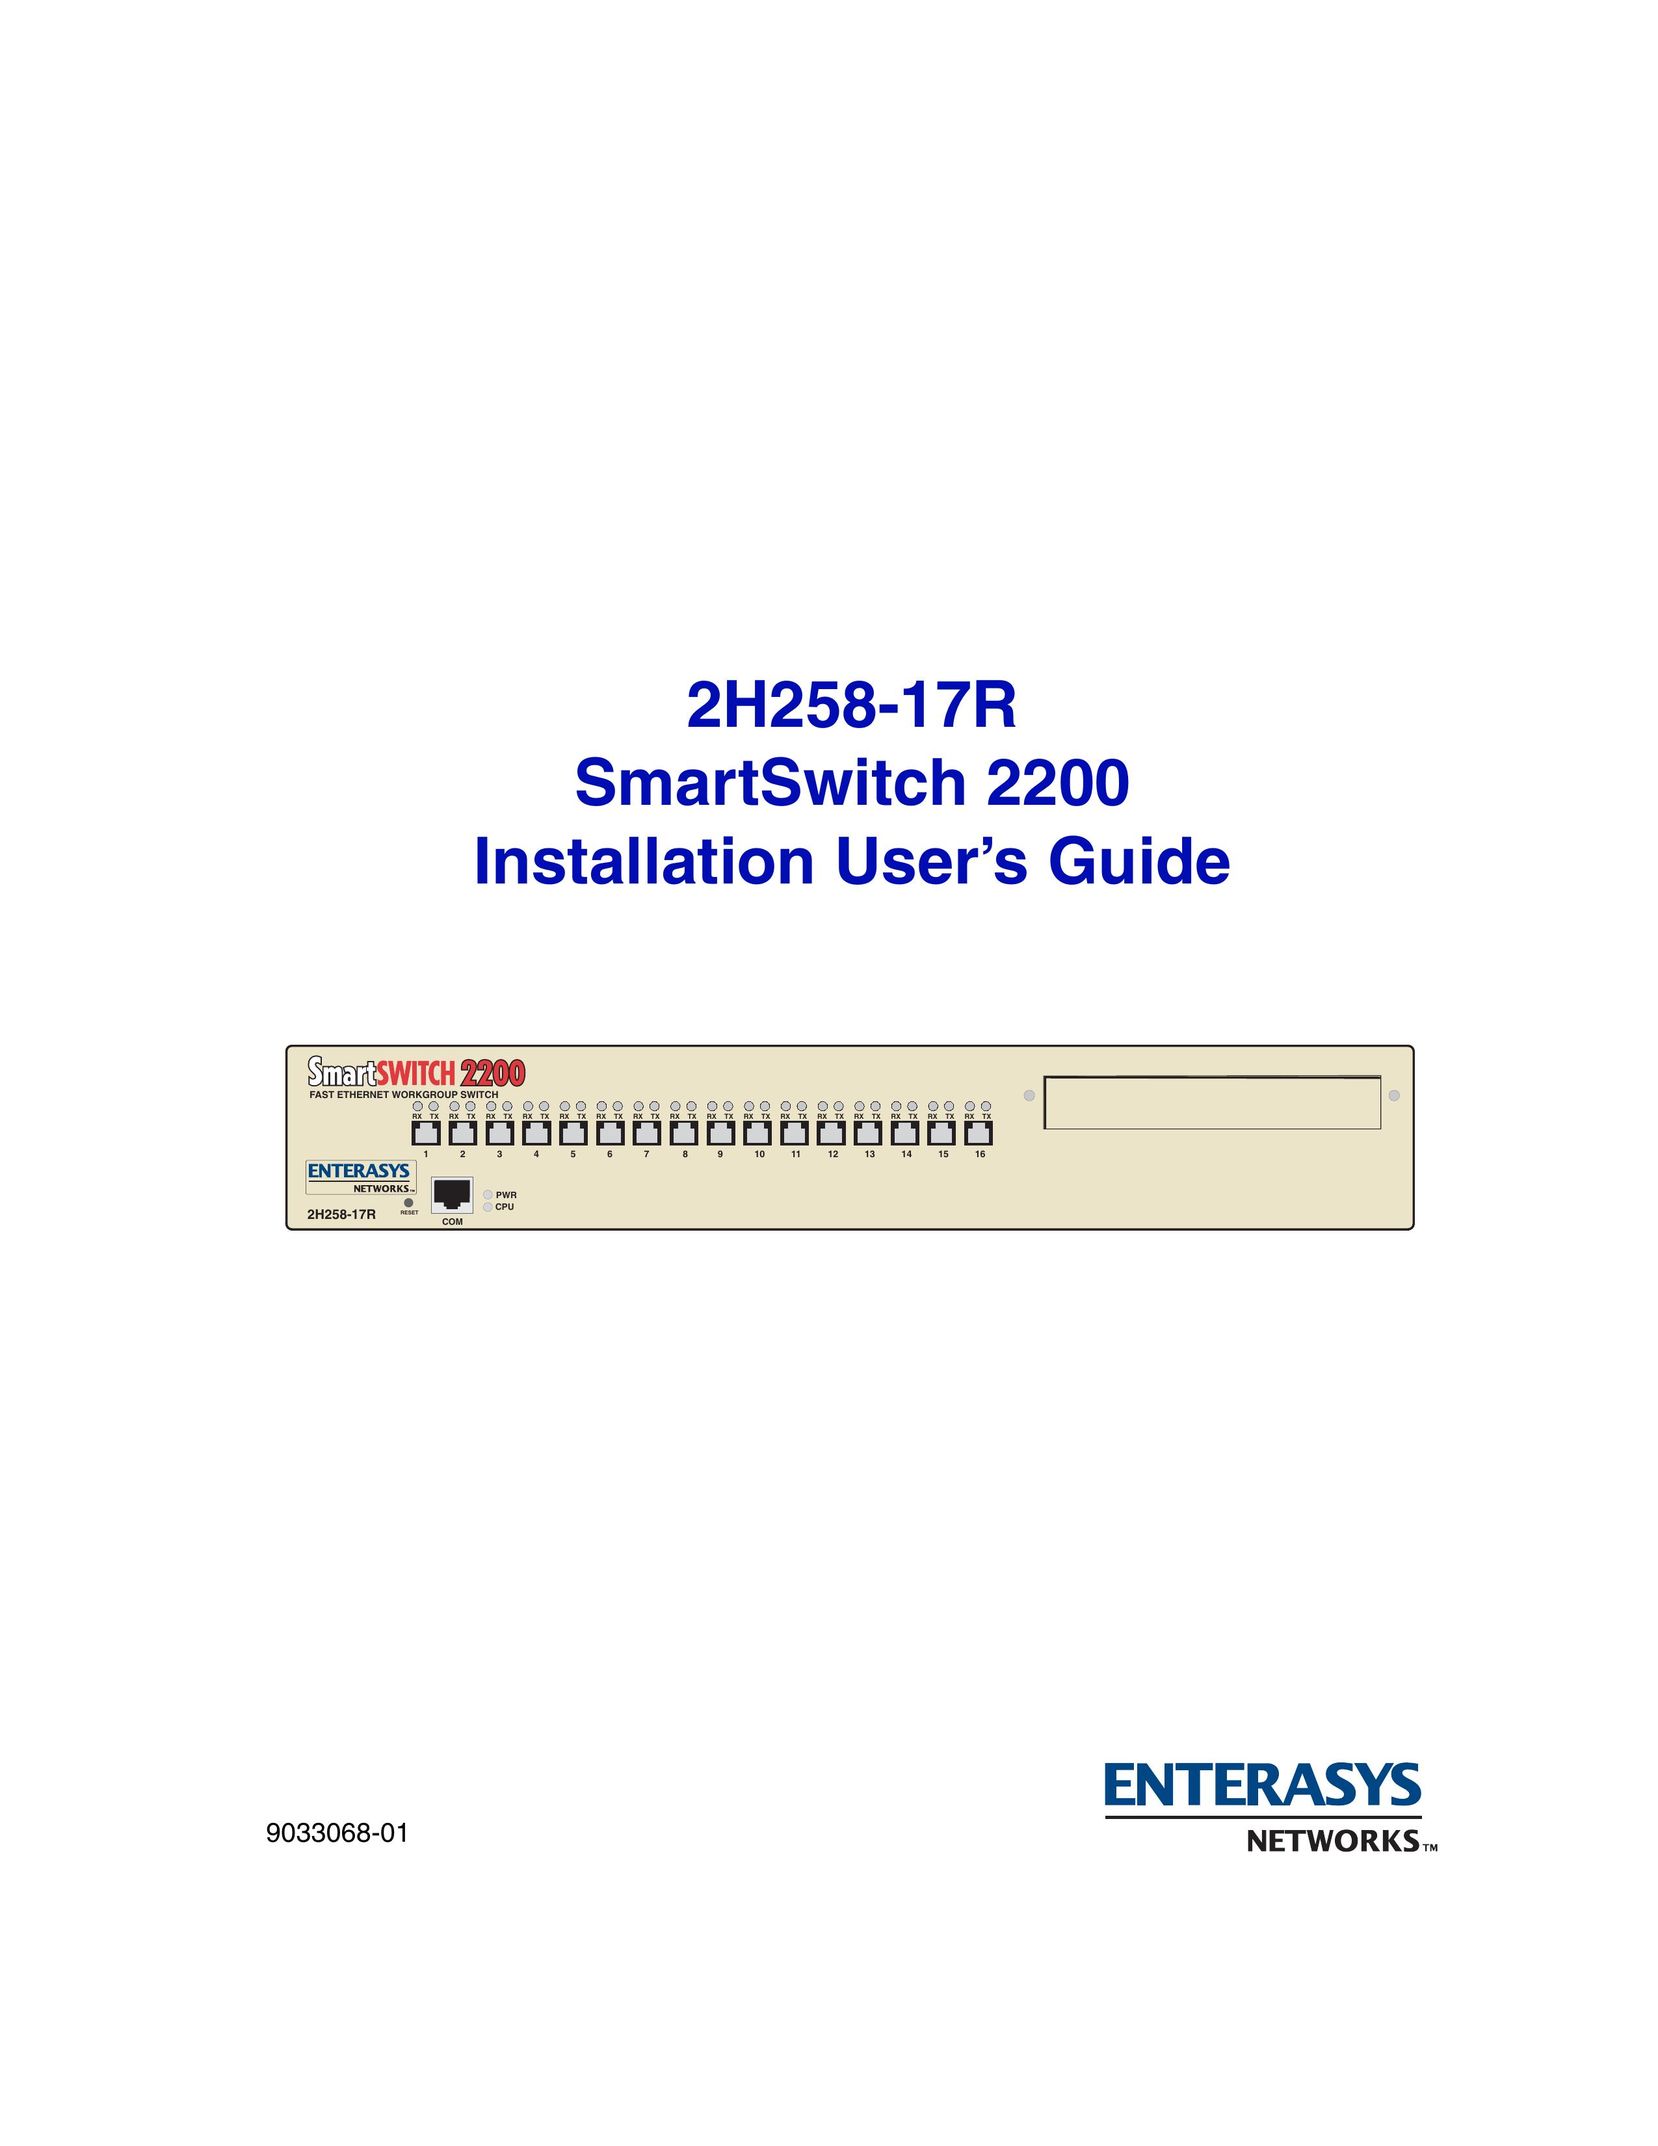 Enterasys Networks 2200 Switch User Manual